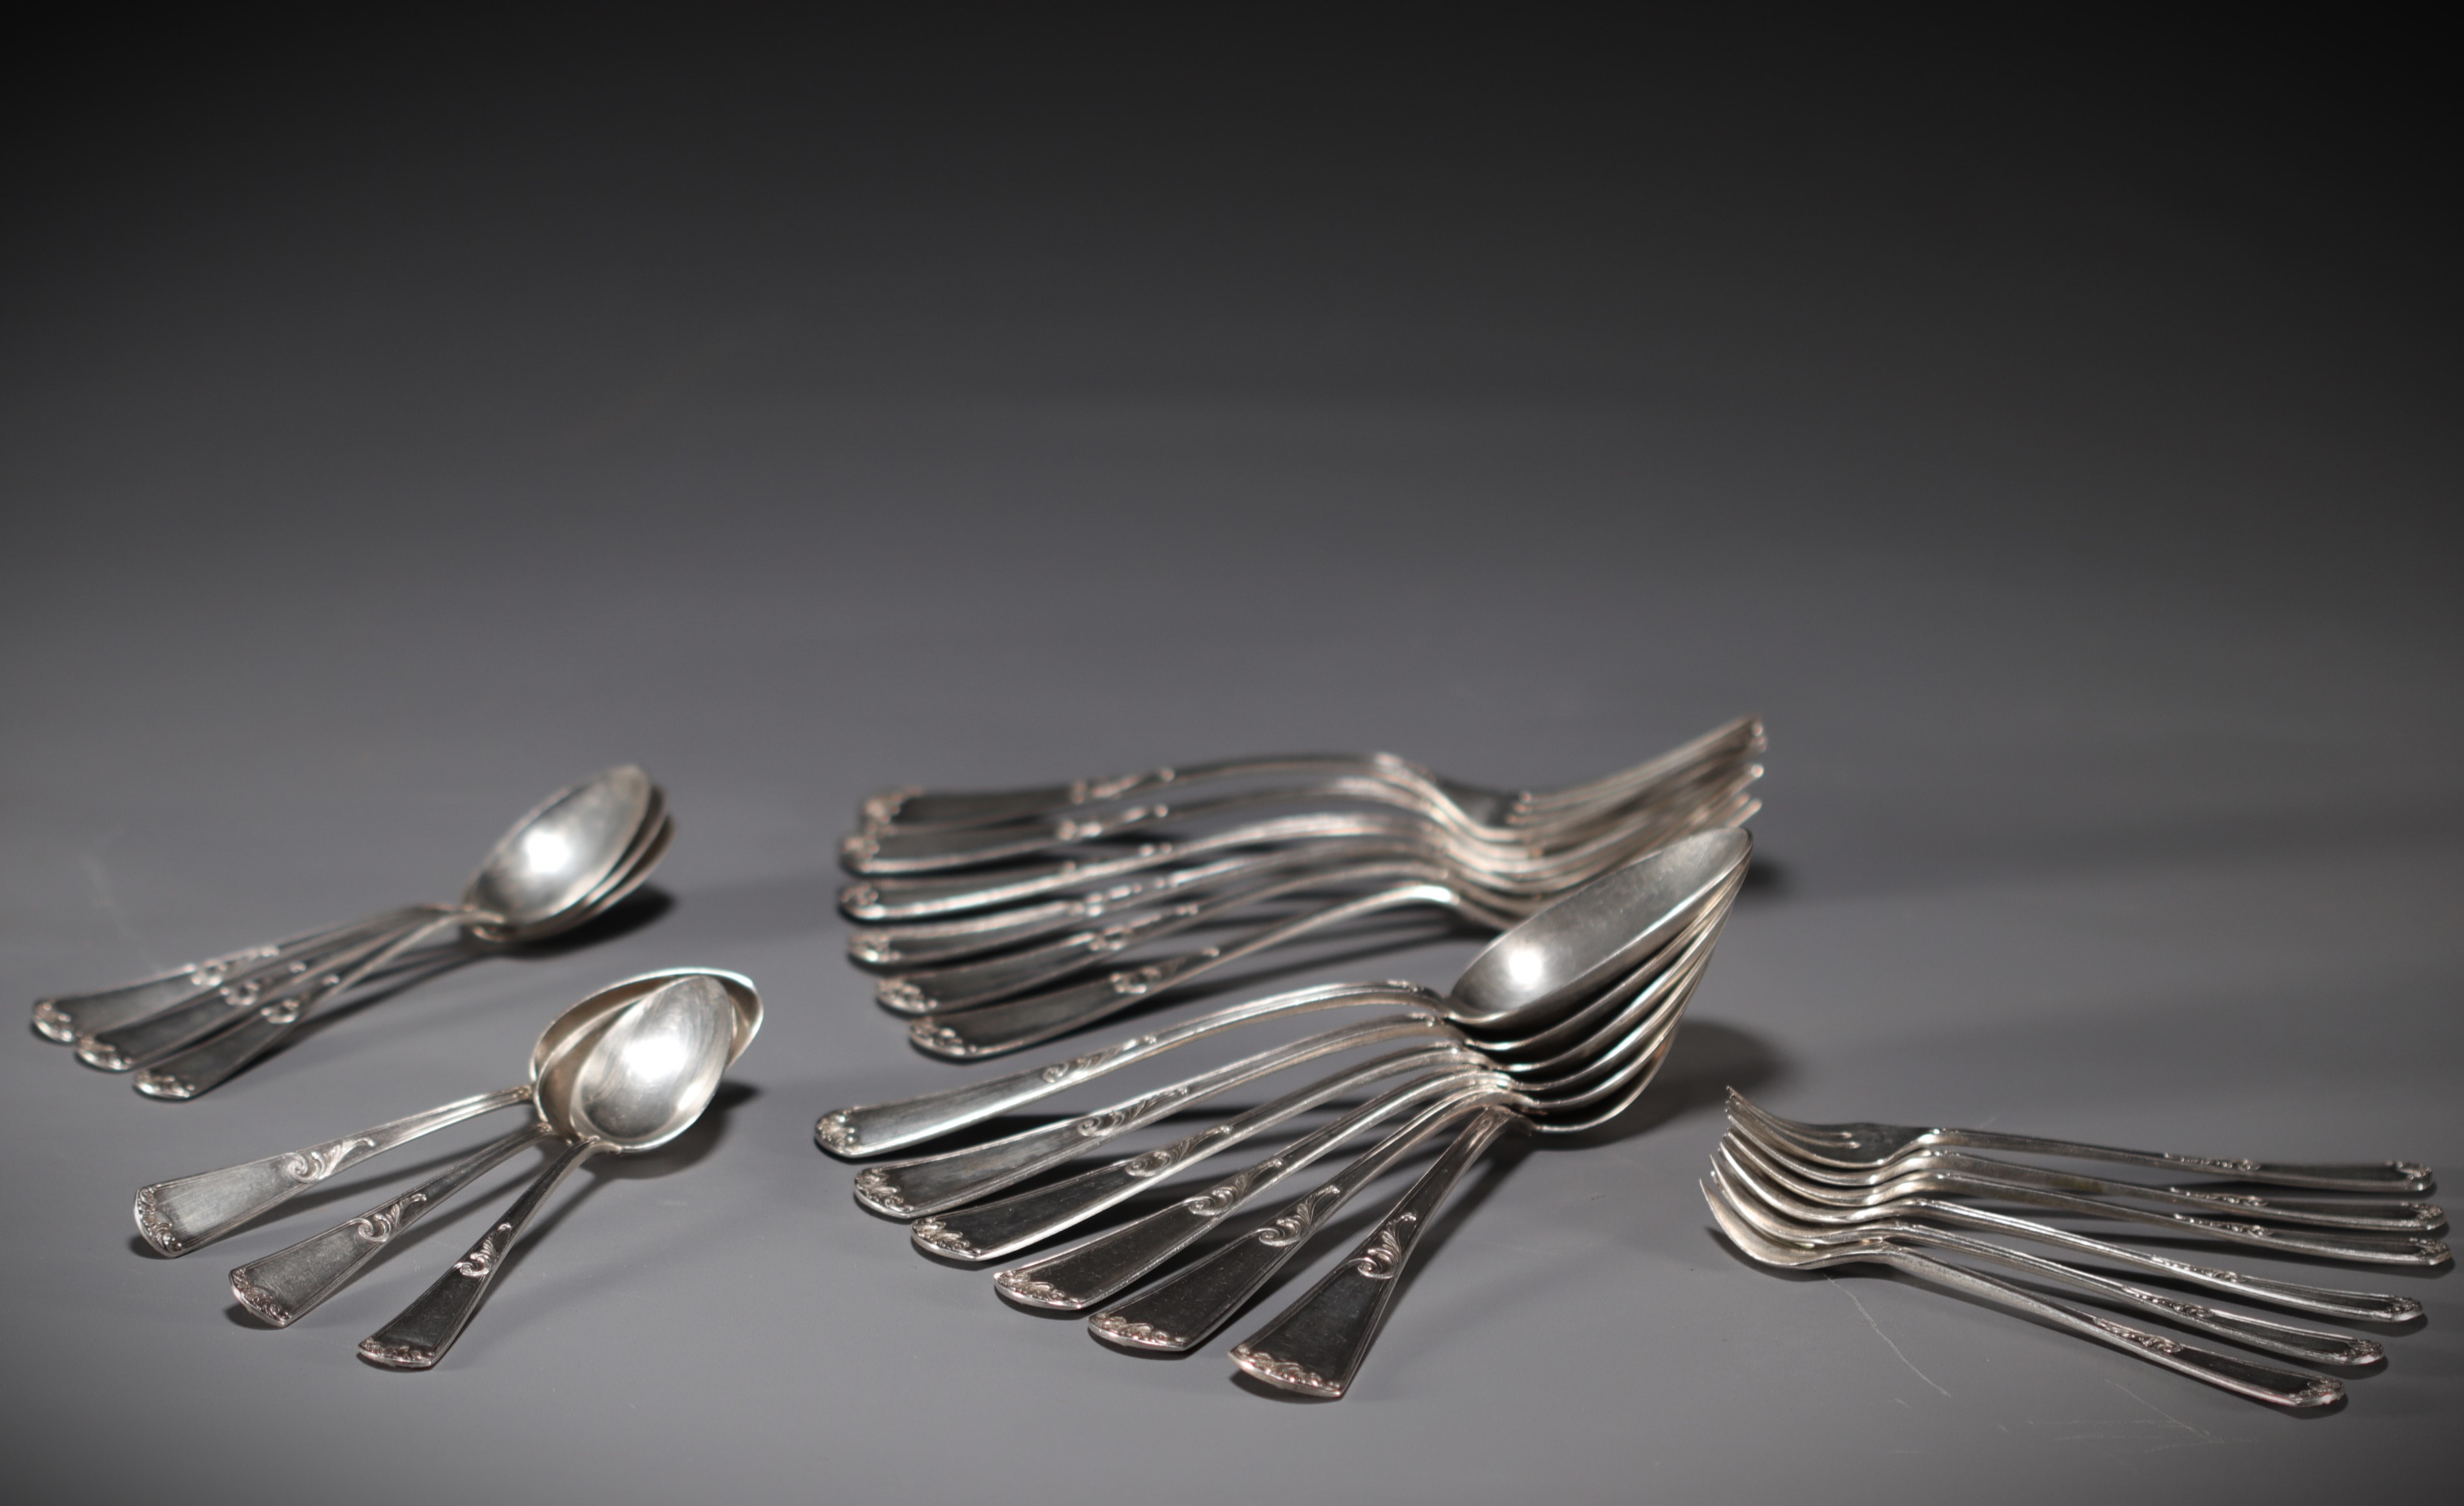 Set of 24 pieces of solid silver flatware, hallmarked V.R. - Image 2 of 3